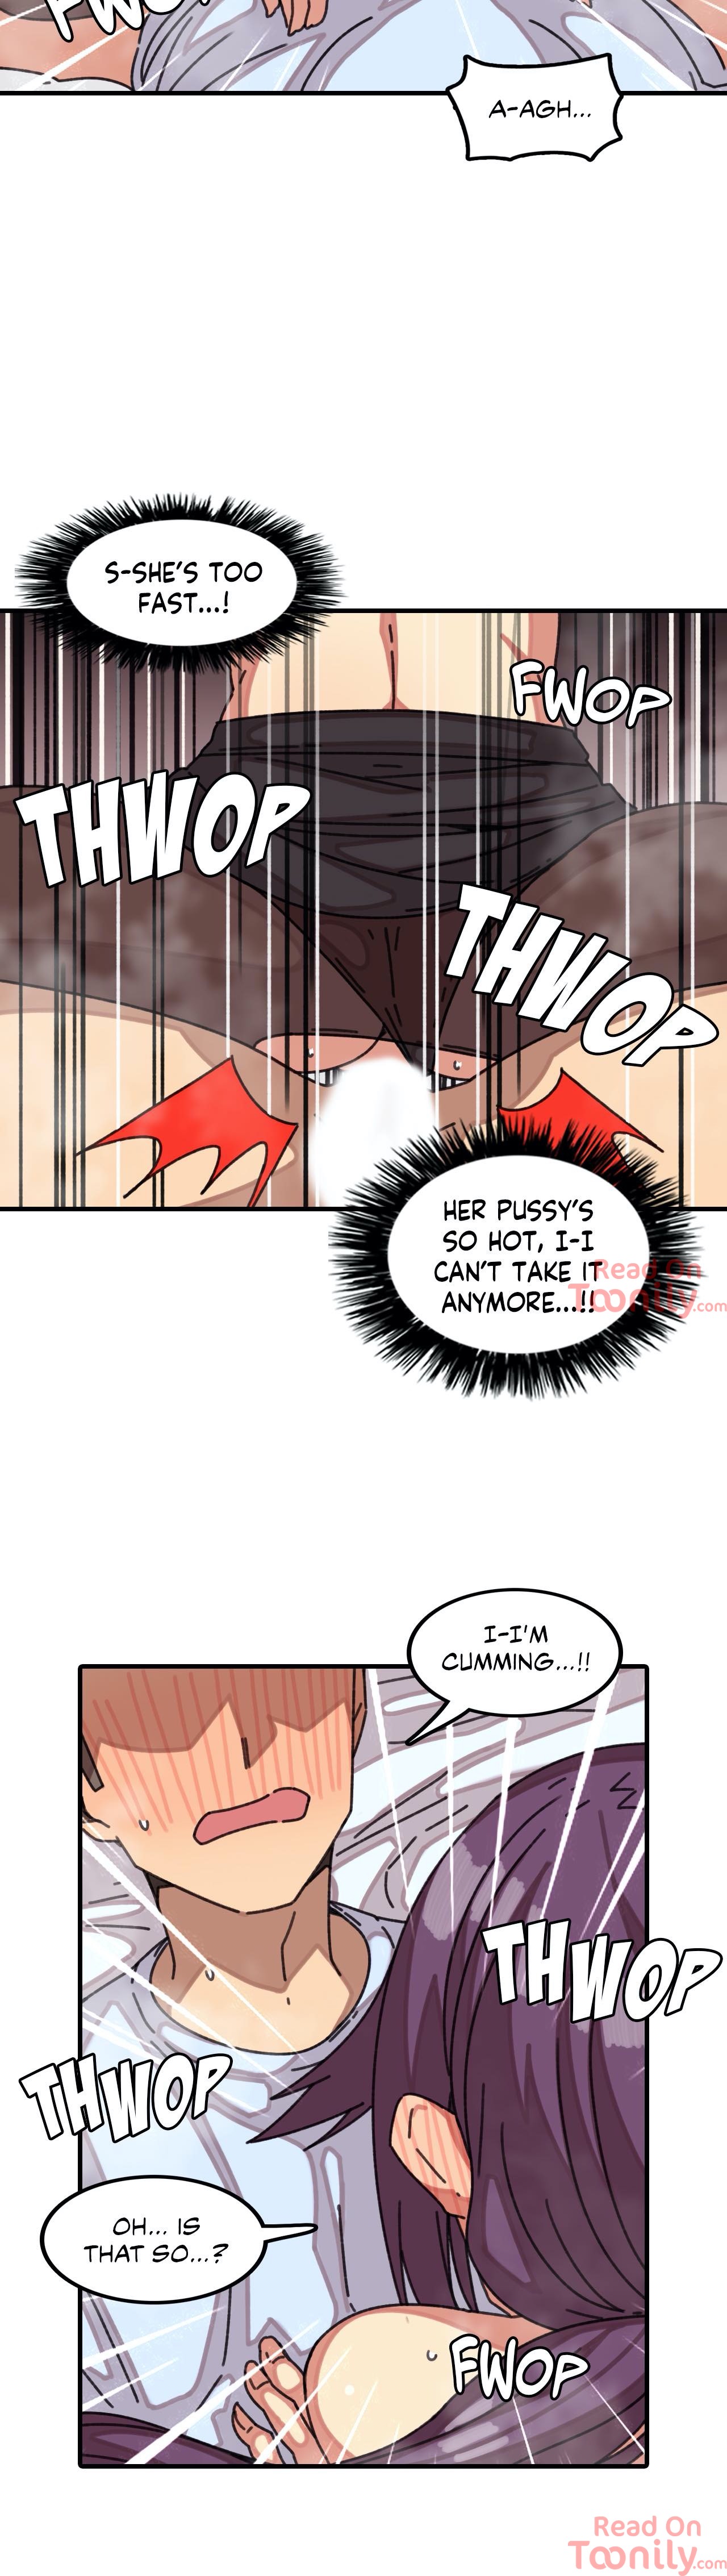 The Girl That Lingers in the Wall - Chapter 20 Page 4